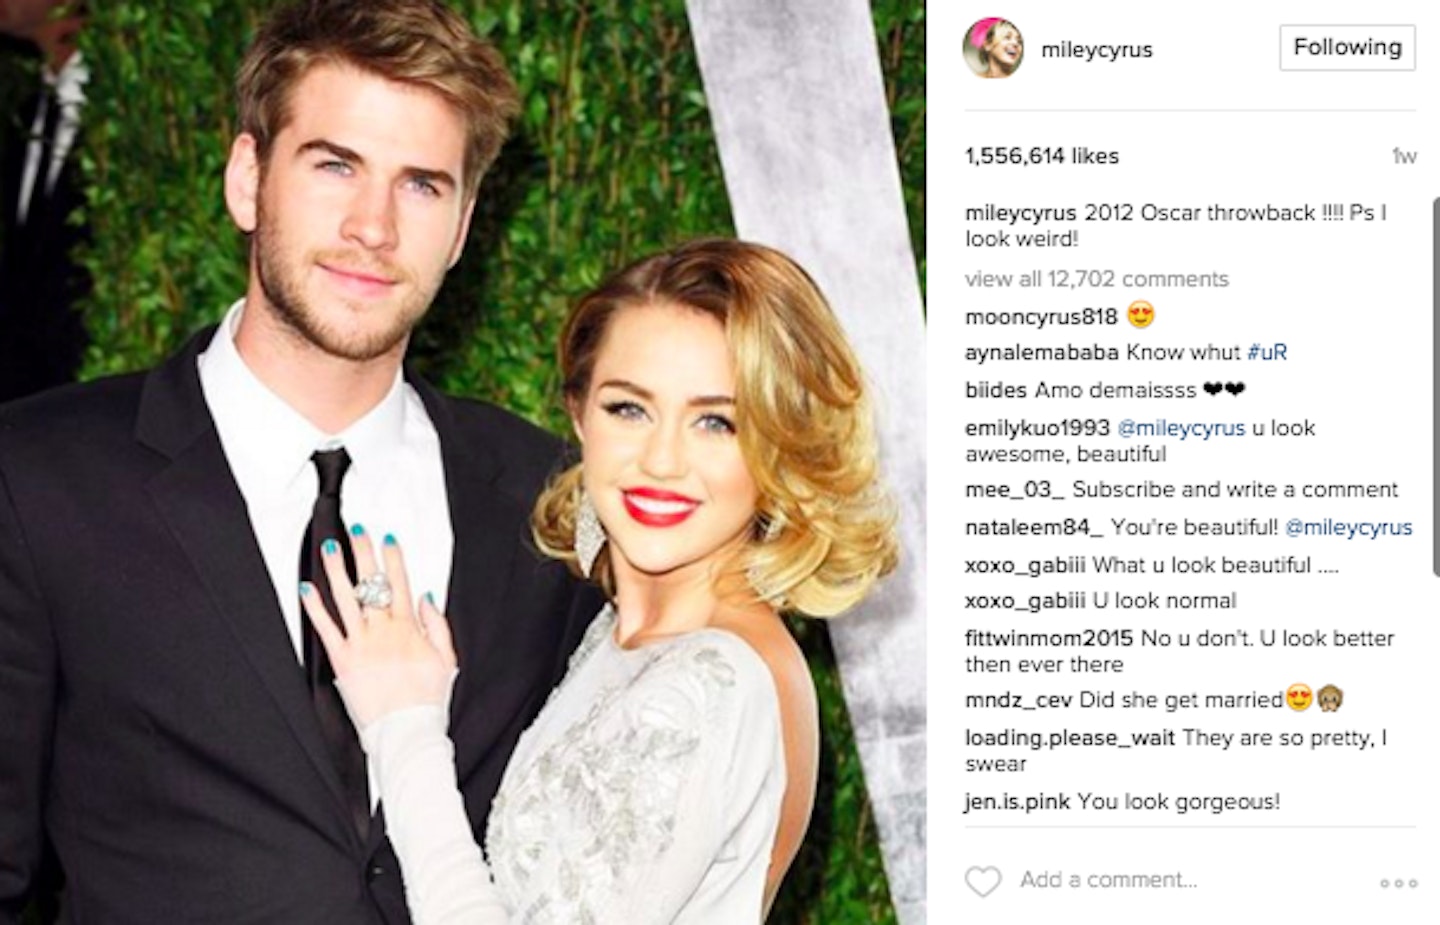 Miley Cyrus and Liam Hemsworth married